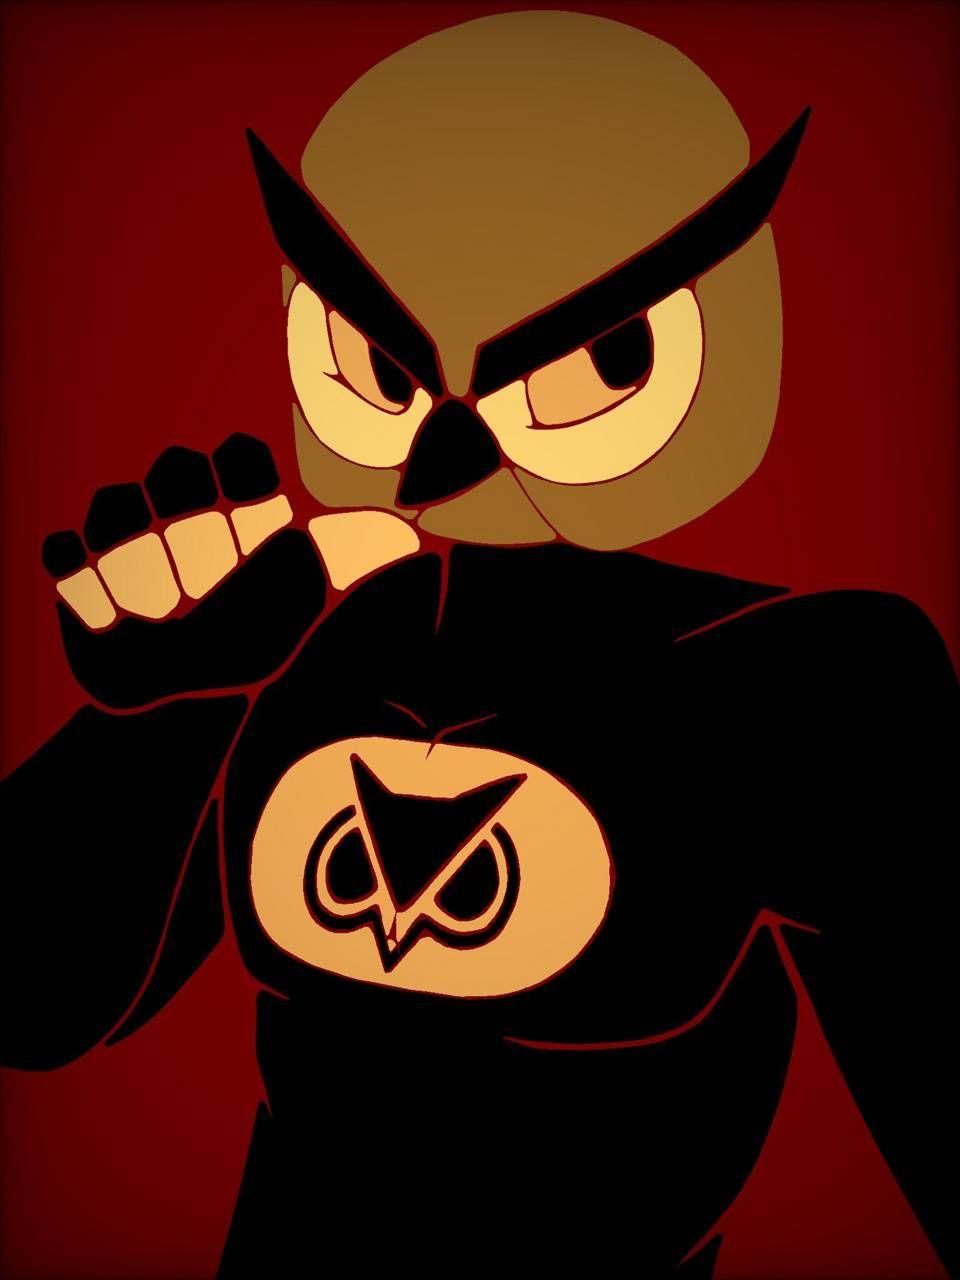 vanossgaming wallpapers (87+ background pictures) on vanossgaming and the group wallpapers